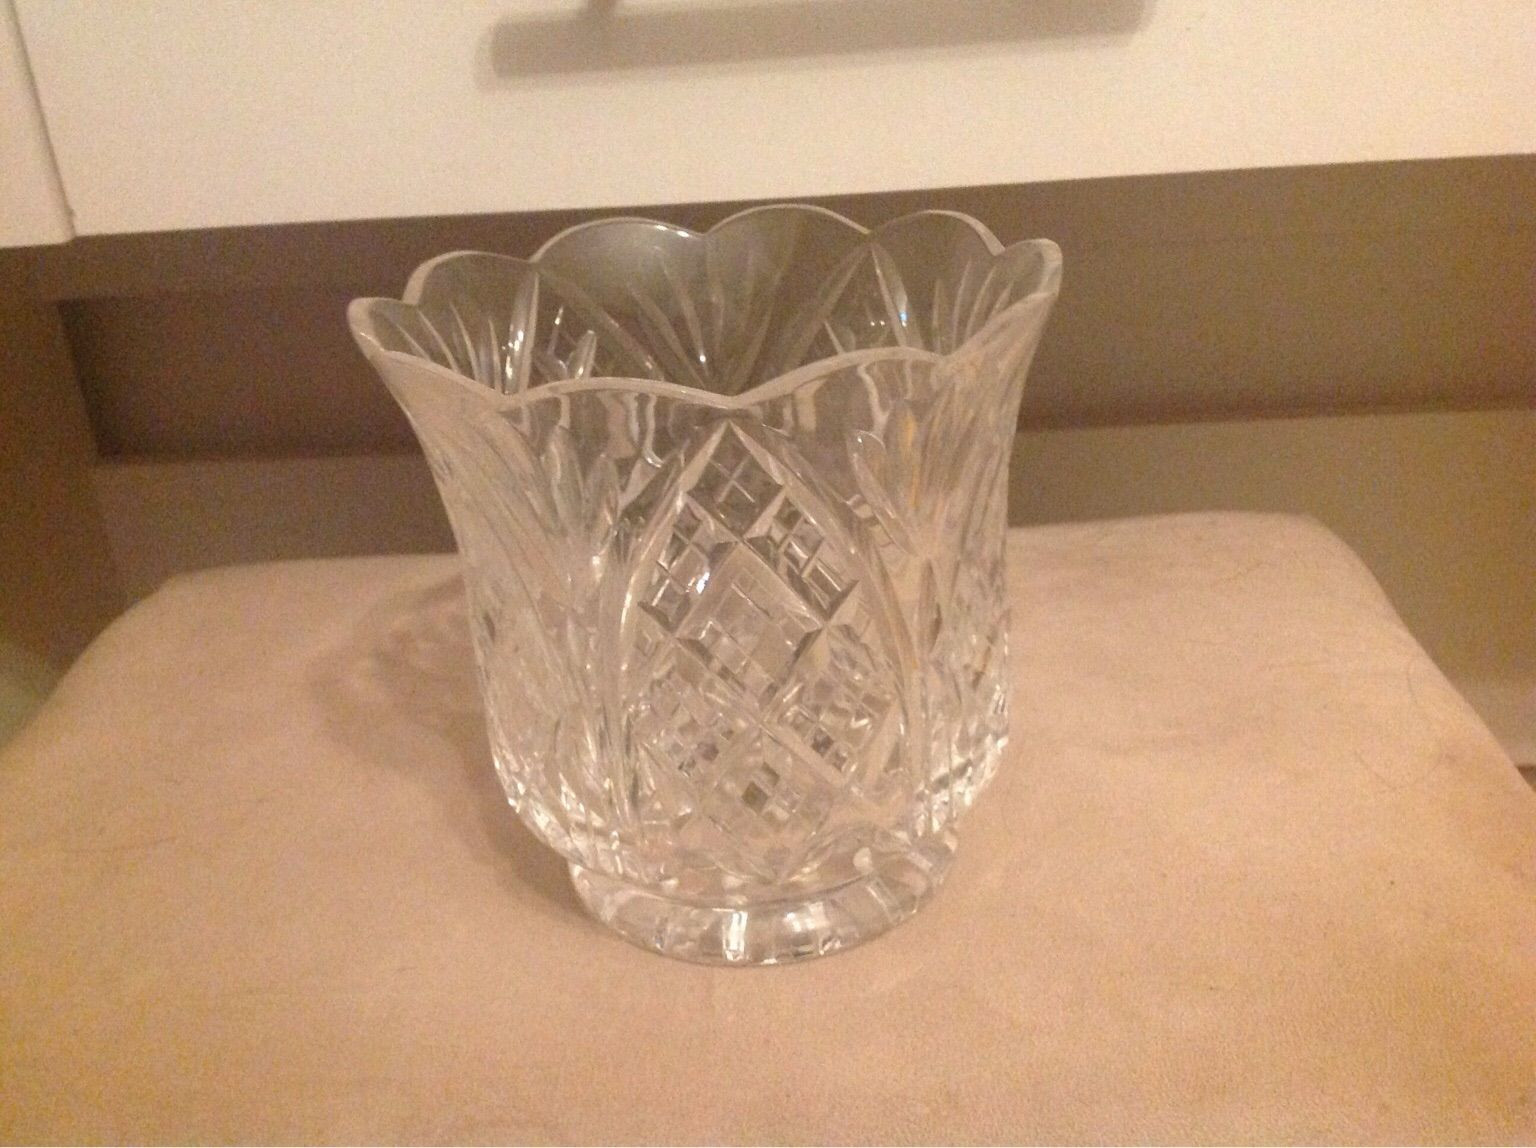 21 attractive Weller Pottery Vase Wild Rose 2022 free download weller pottery vase wild rose of https en shpock com i wmucfctt7rd3b1cr 2018 10 10t015529 with regard to waterford crystal vase 20af0c92